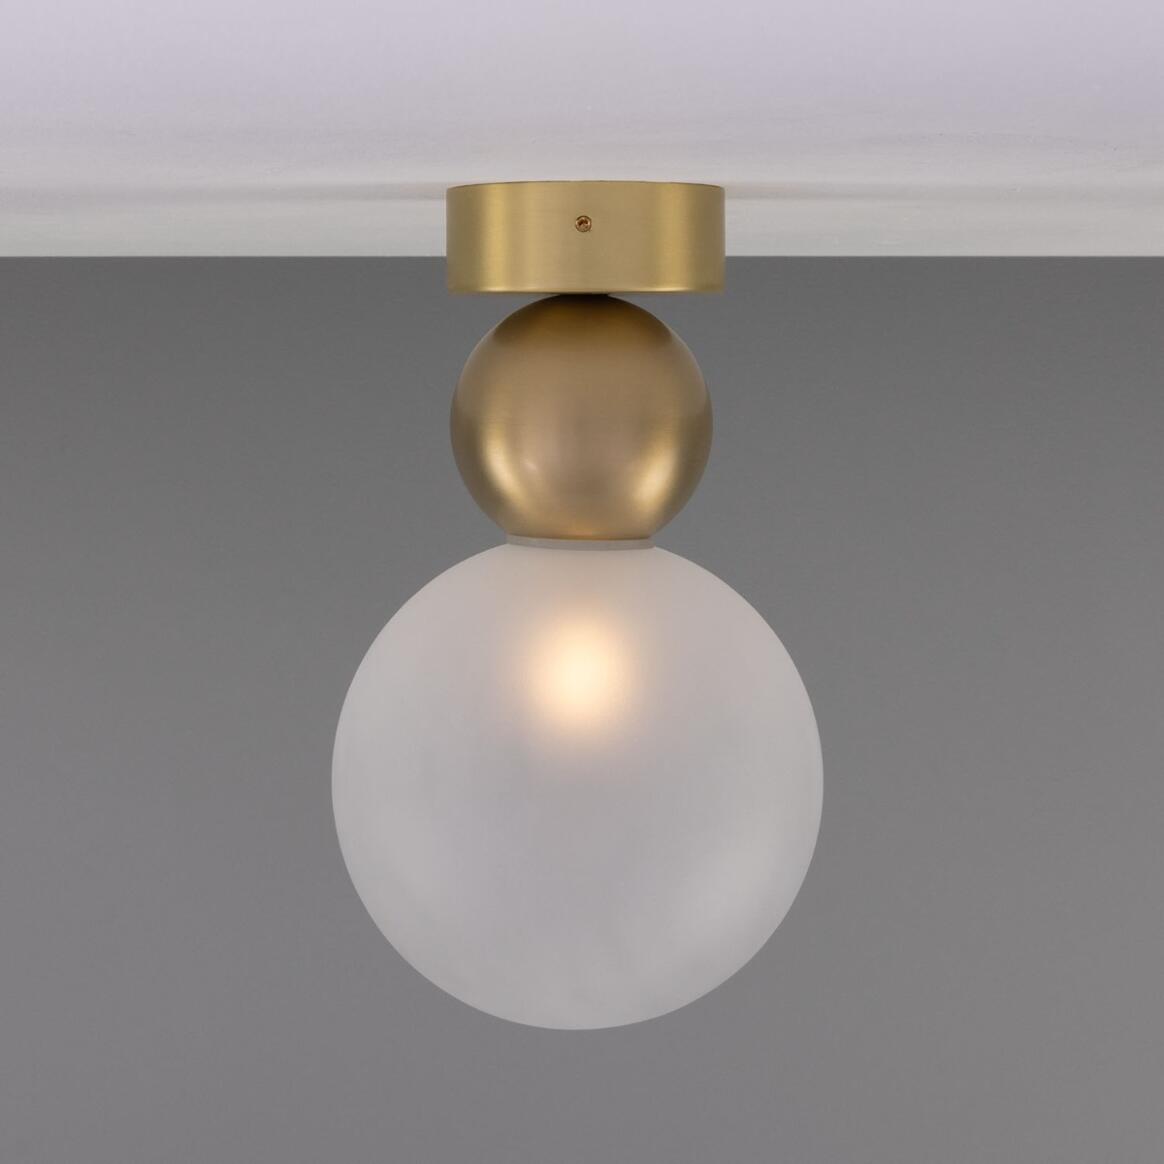 Helena Glass and Brass Ball Ceiling Light 5.9" main product image